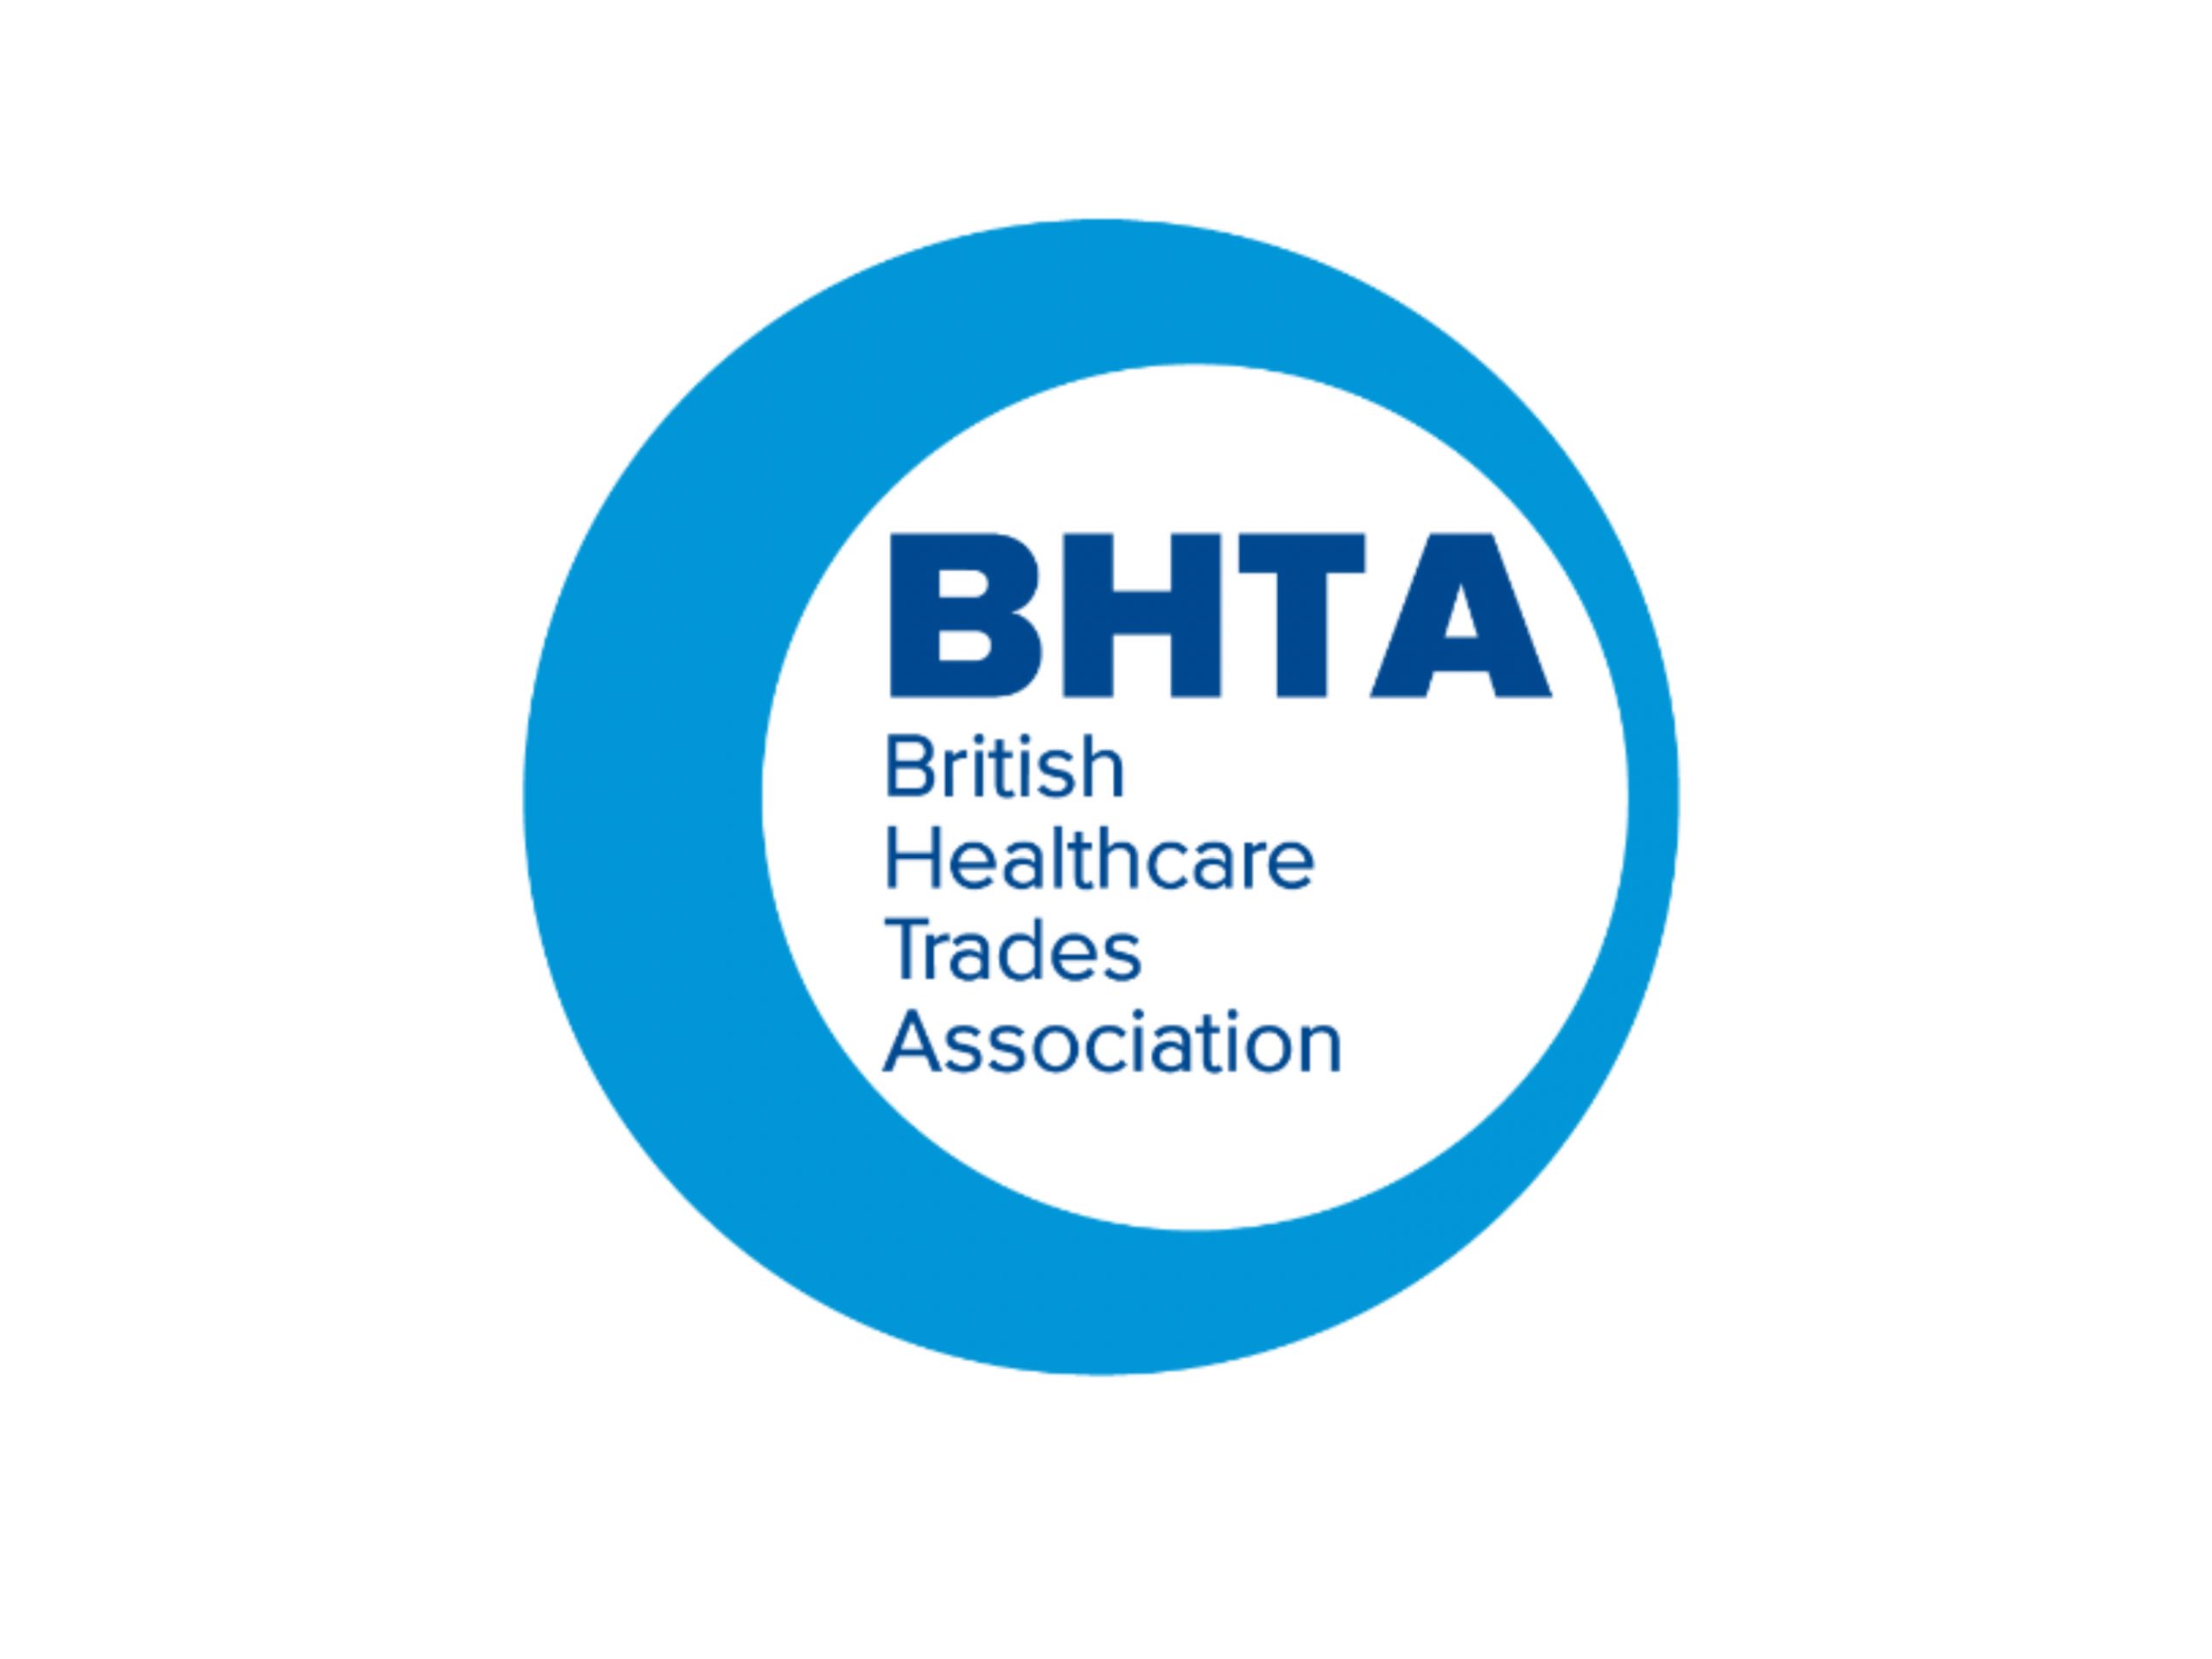 Two new team members to help drive BHTA’s policy agenda and brand awareness